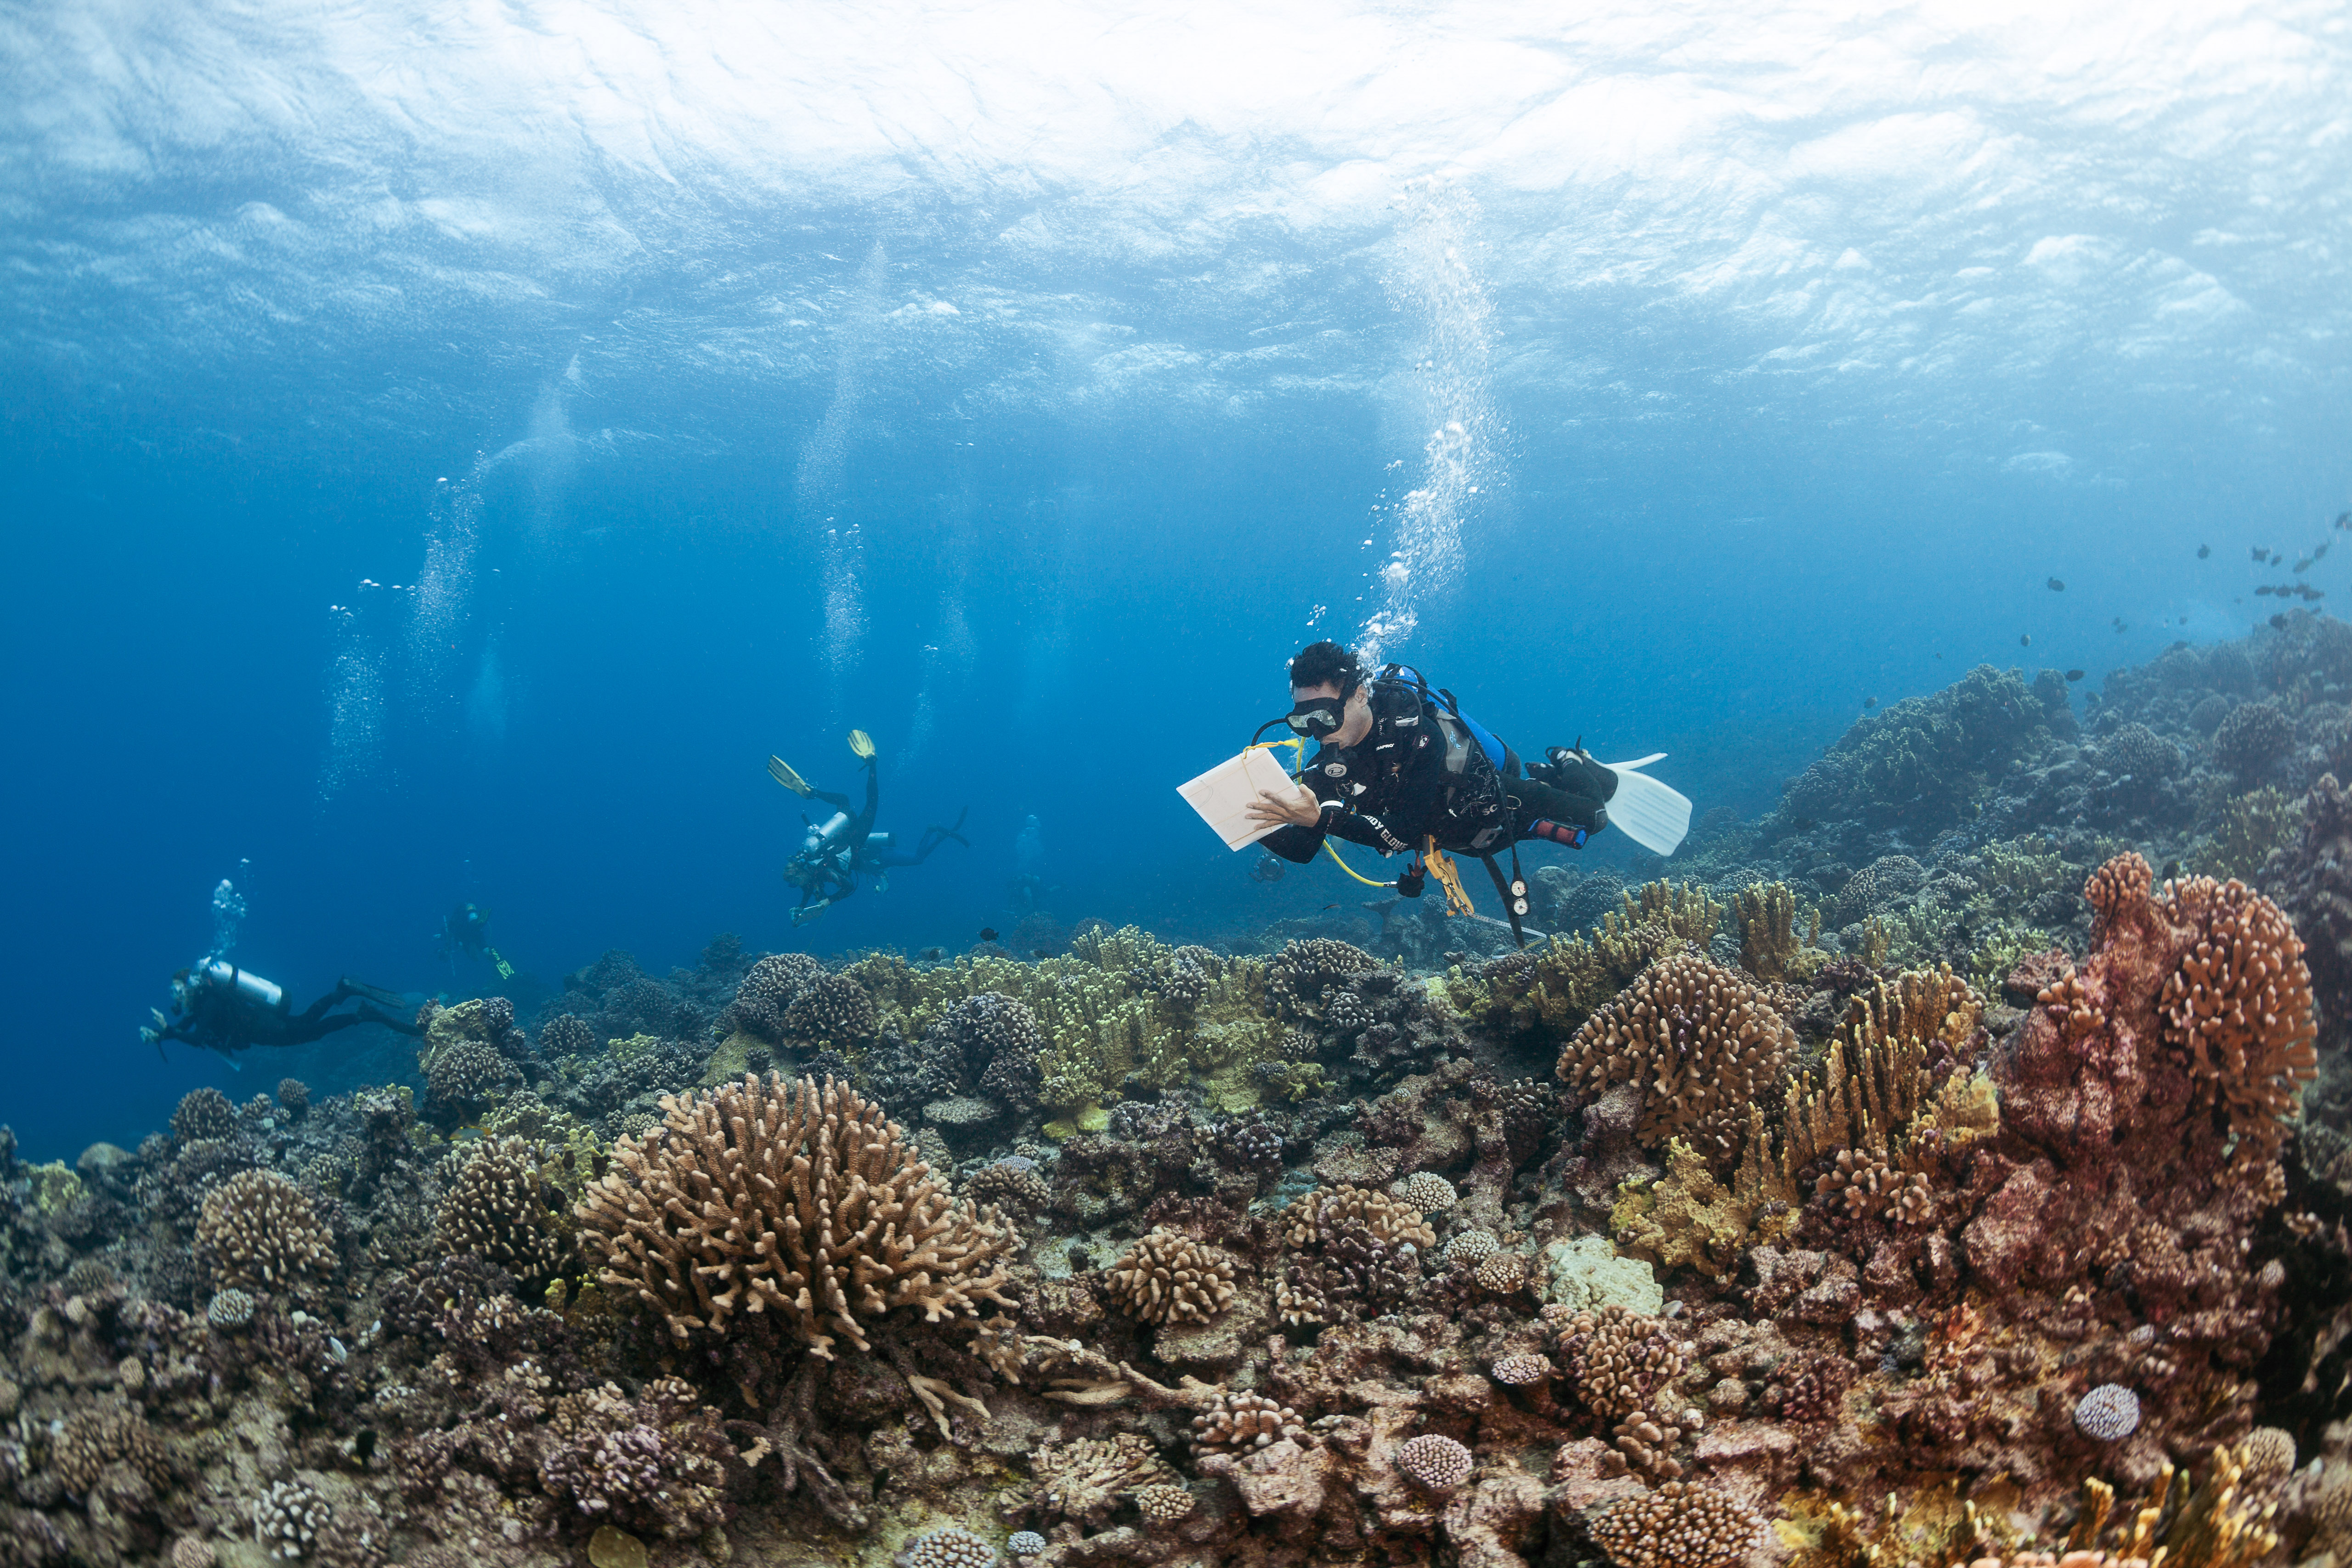 Badi Samaniego conducting a coral reef survey on the Global Reef Expedition.